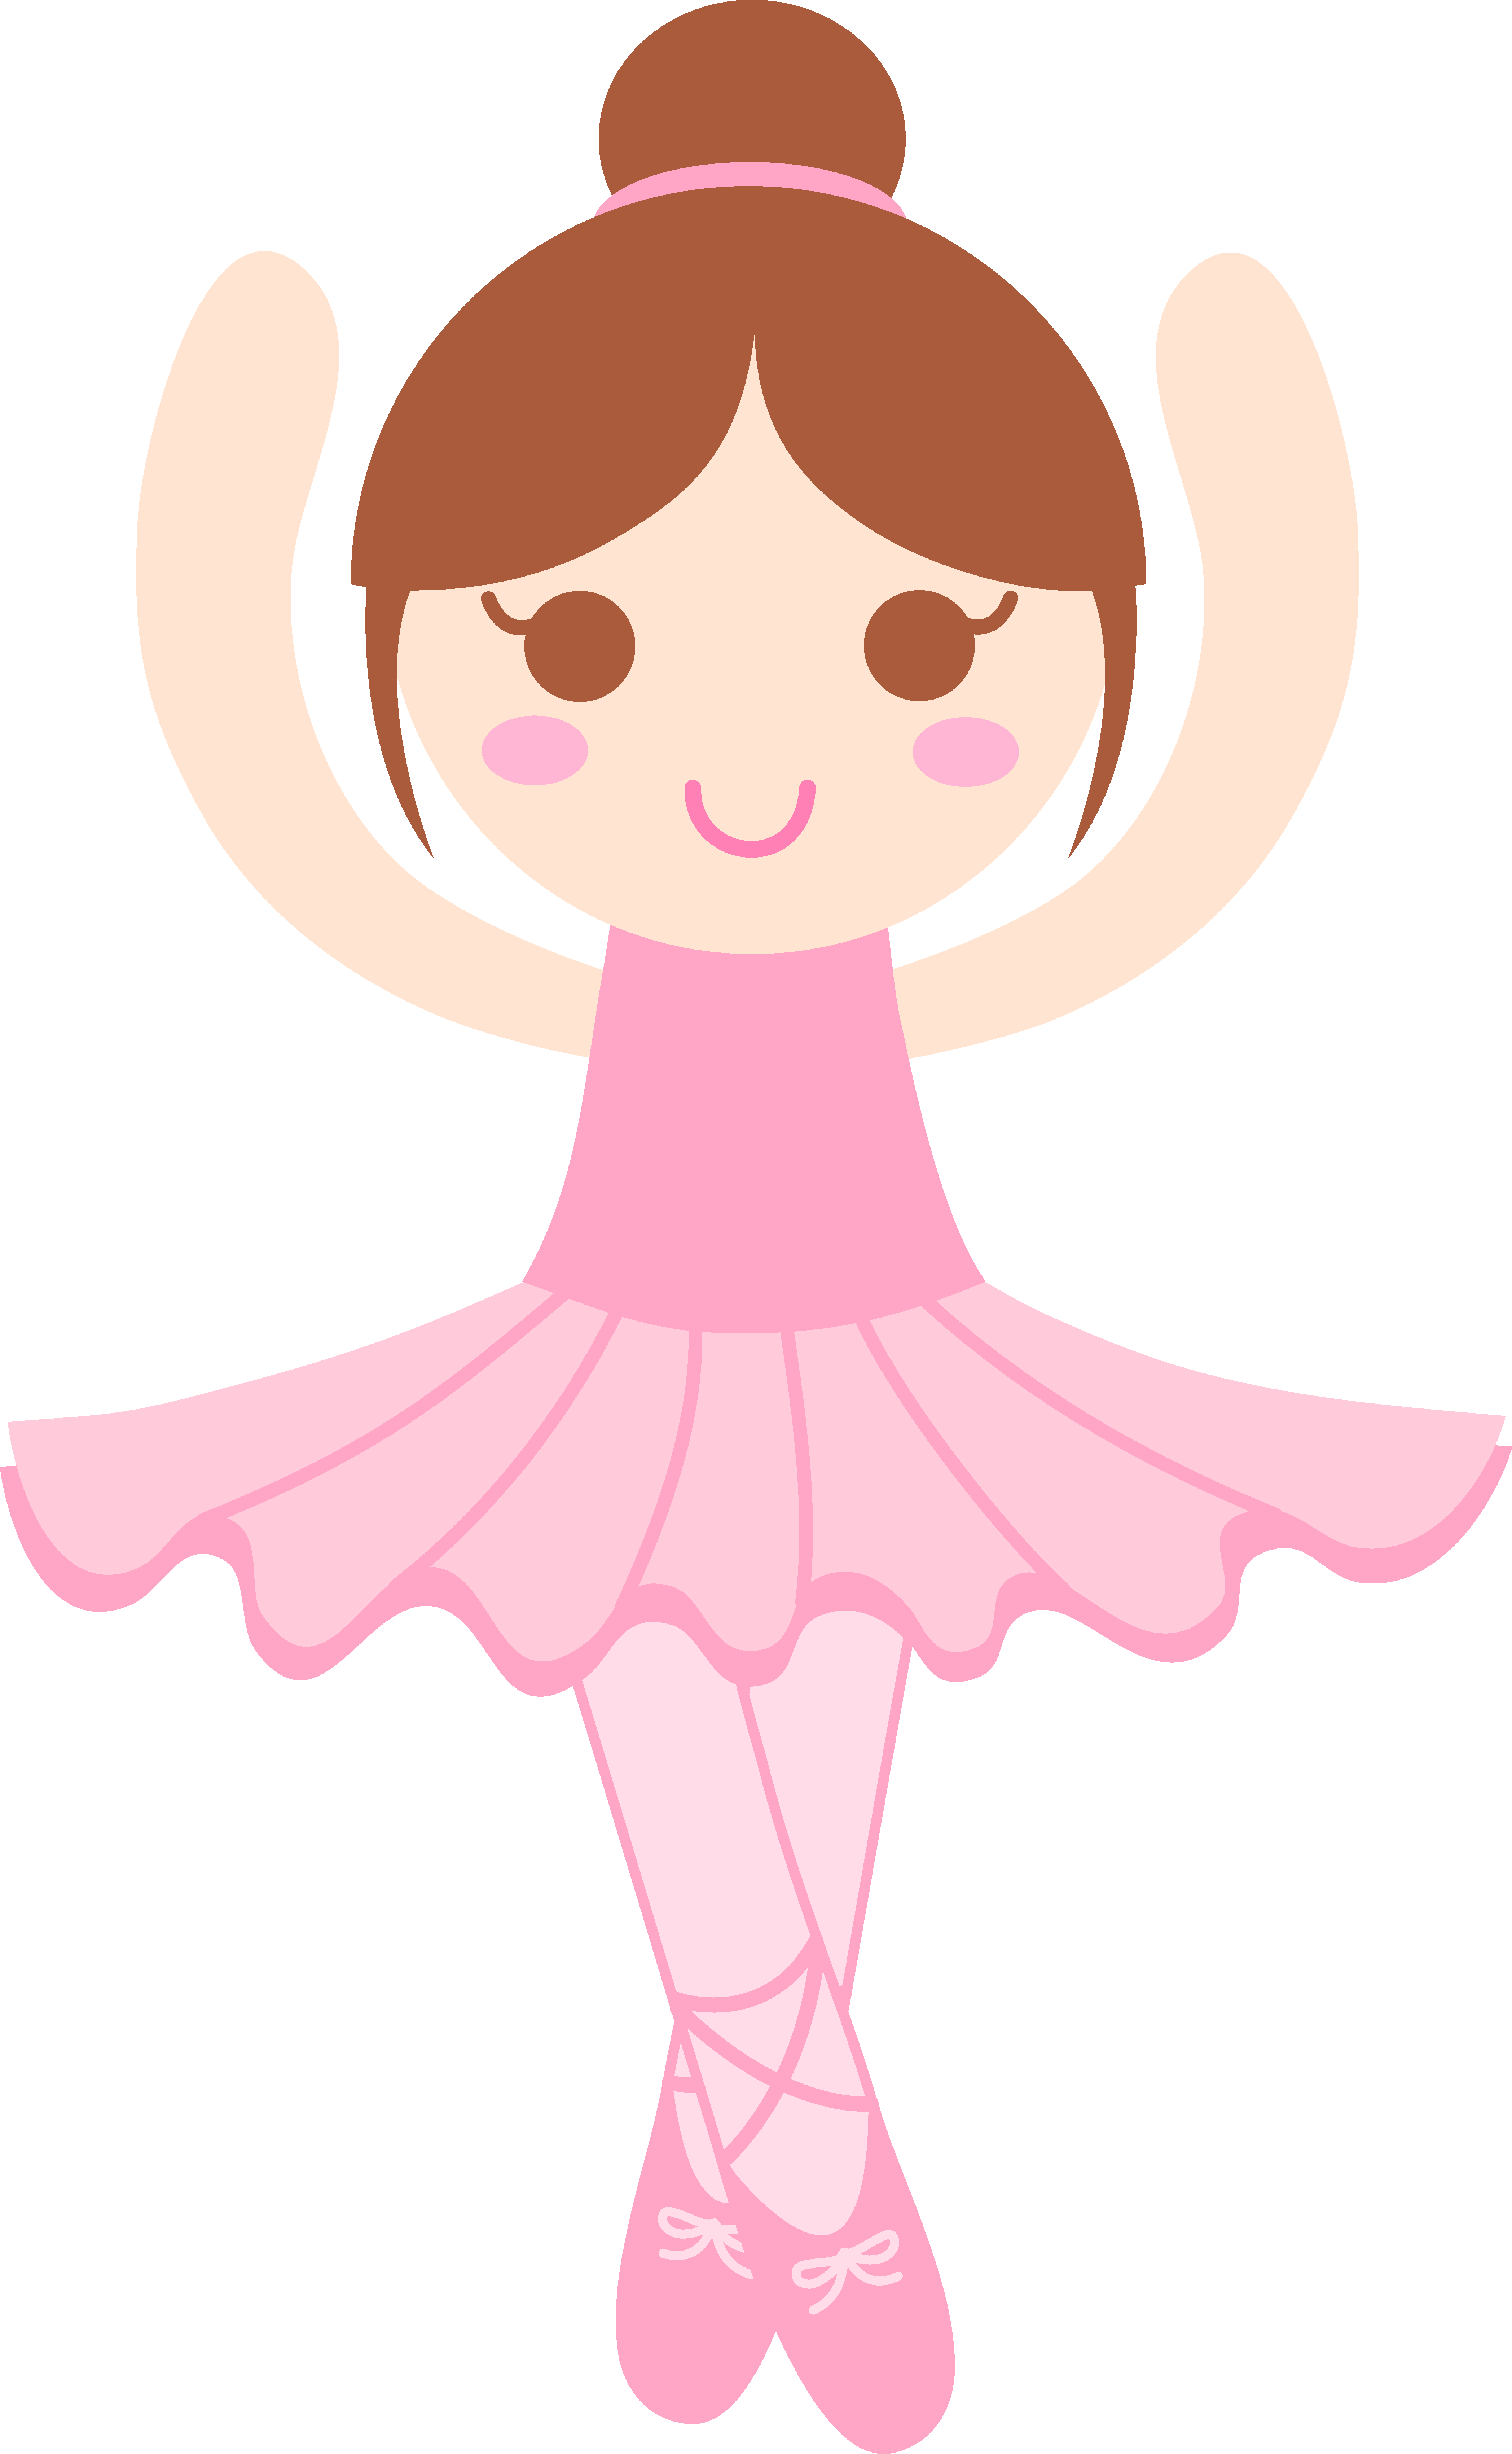 Ballerina Shoes Clip Art Images  Pictures - Becuo